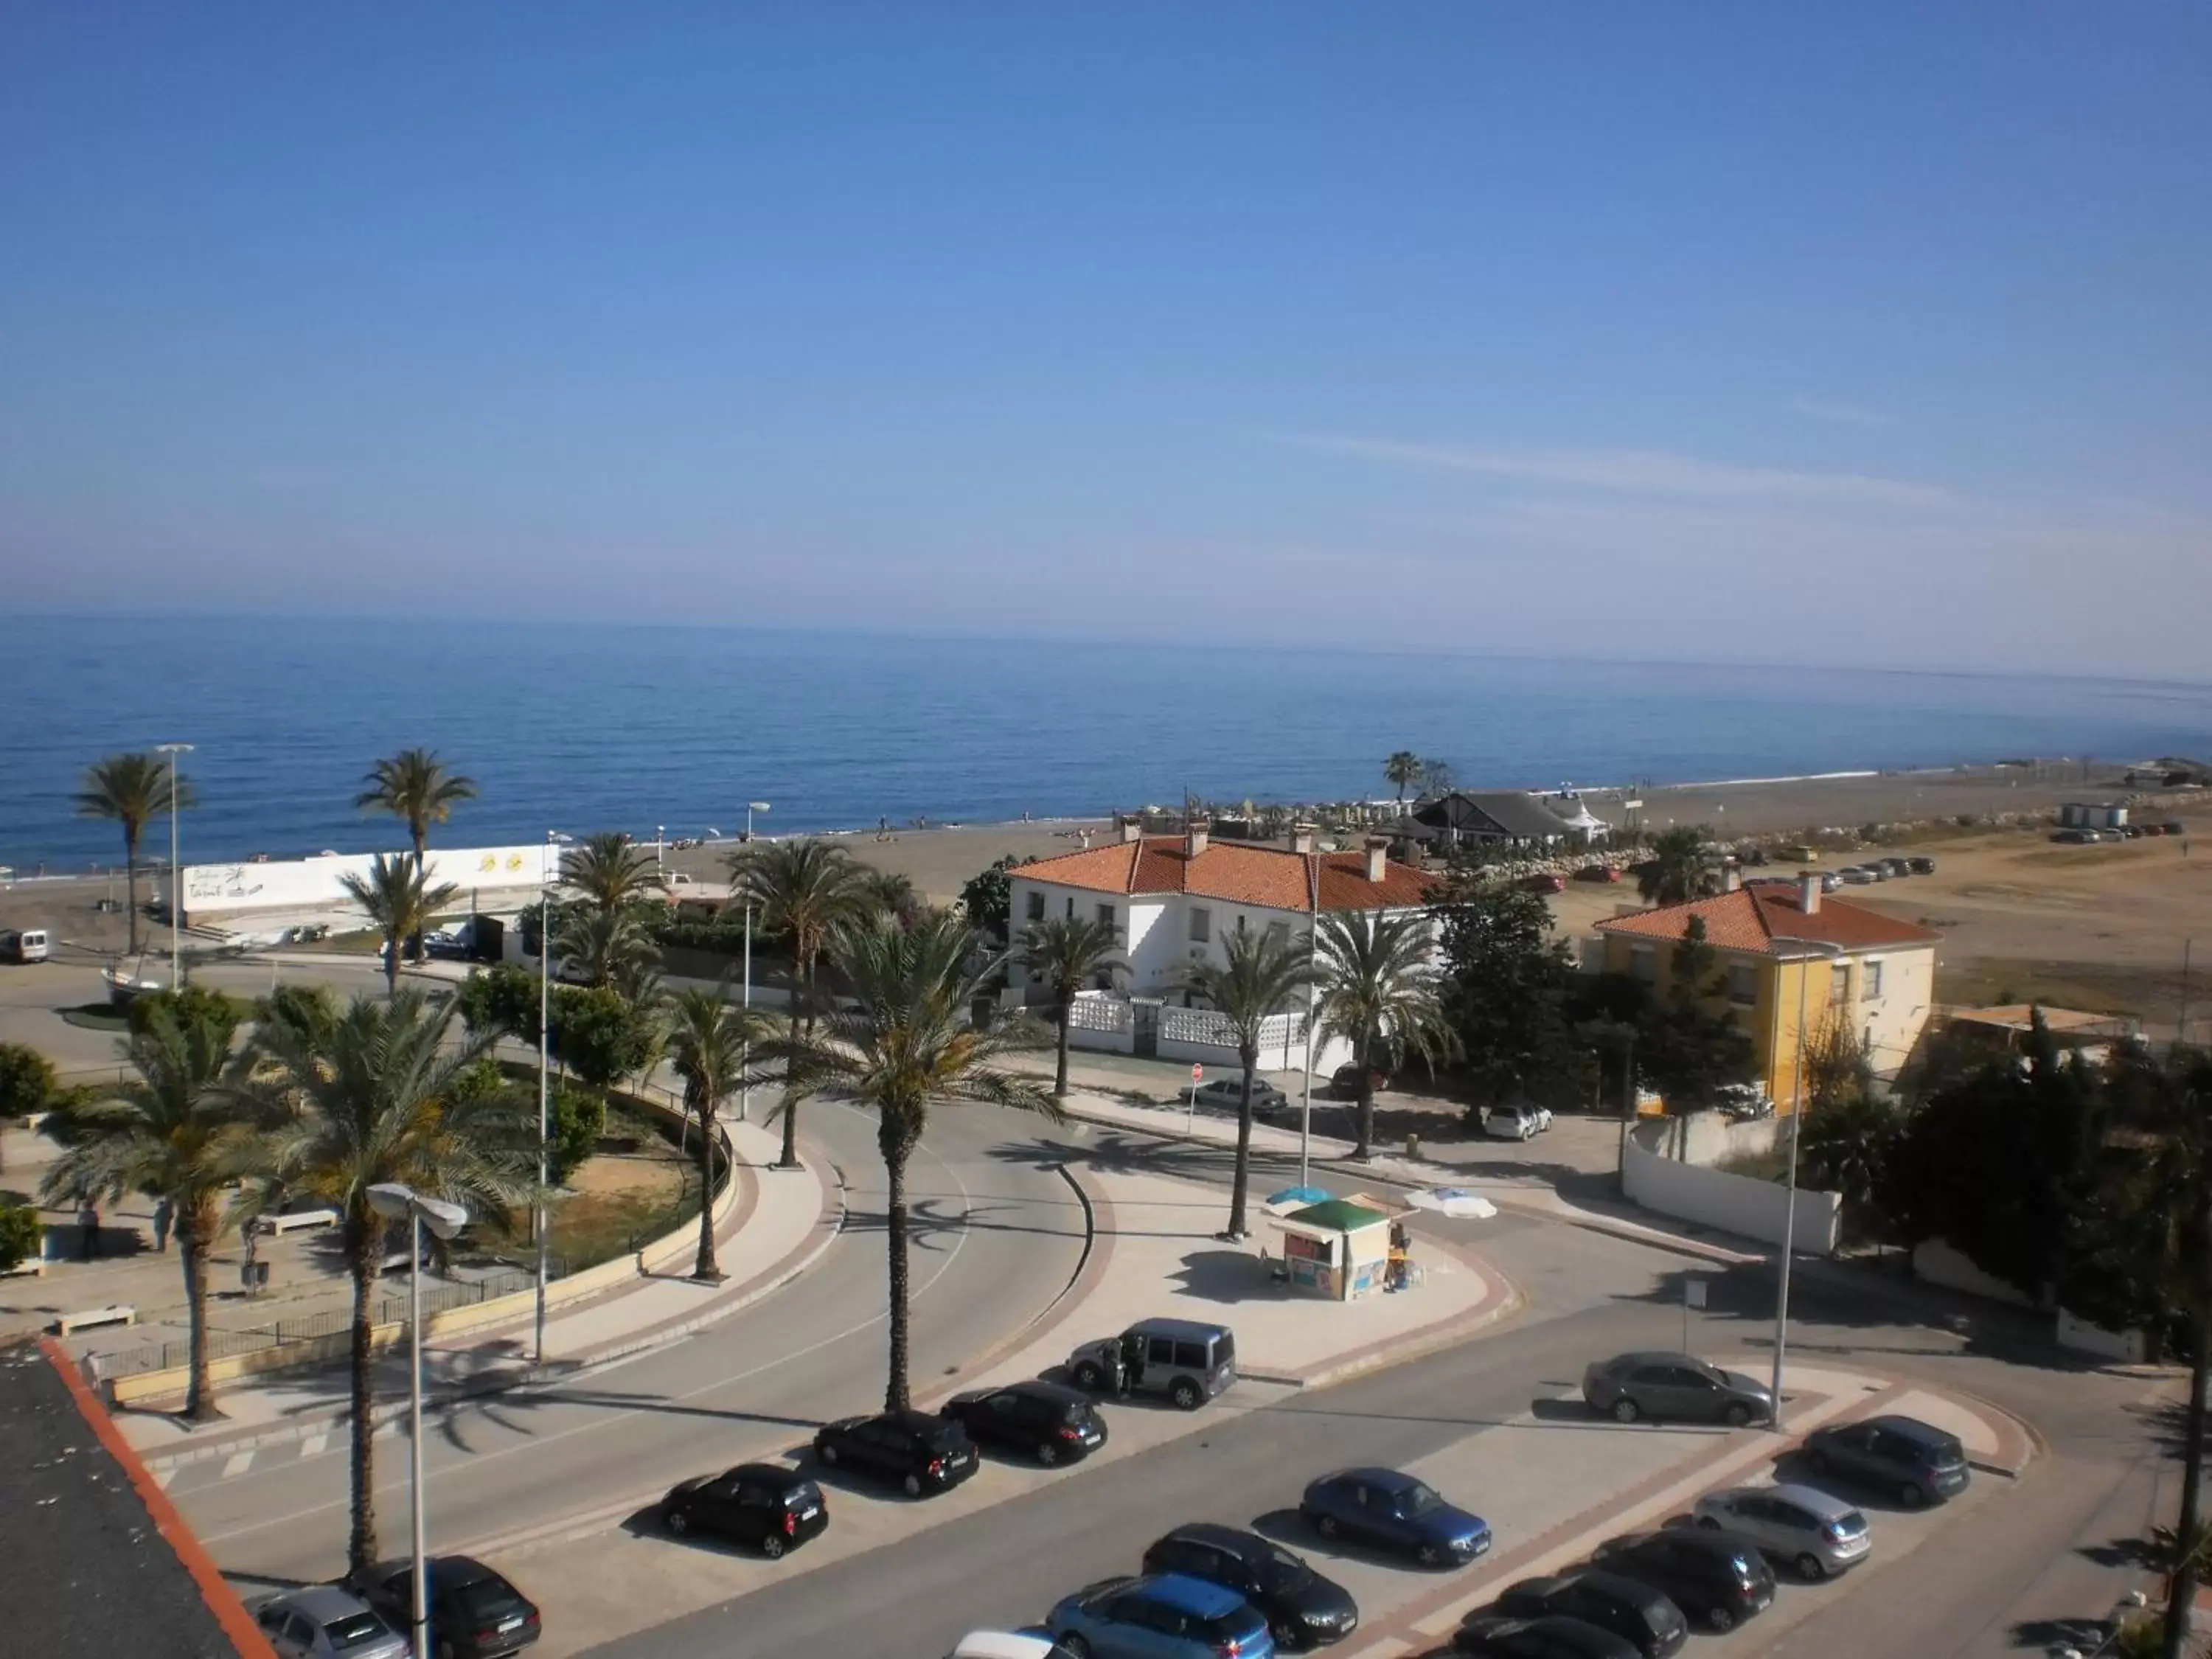 Area and facilities in BQ Andalucia Beach Hotel